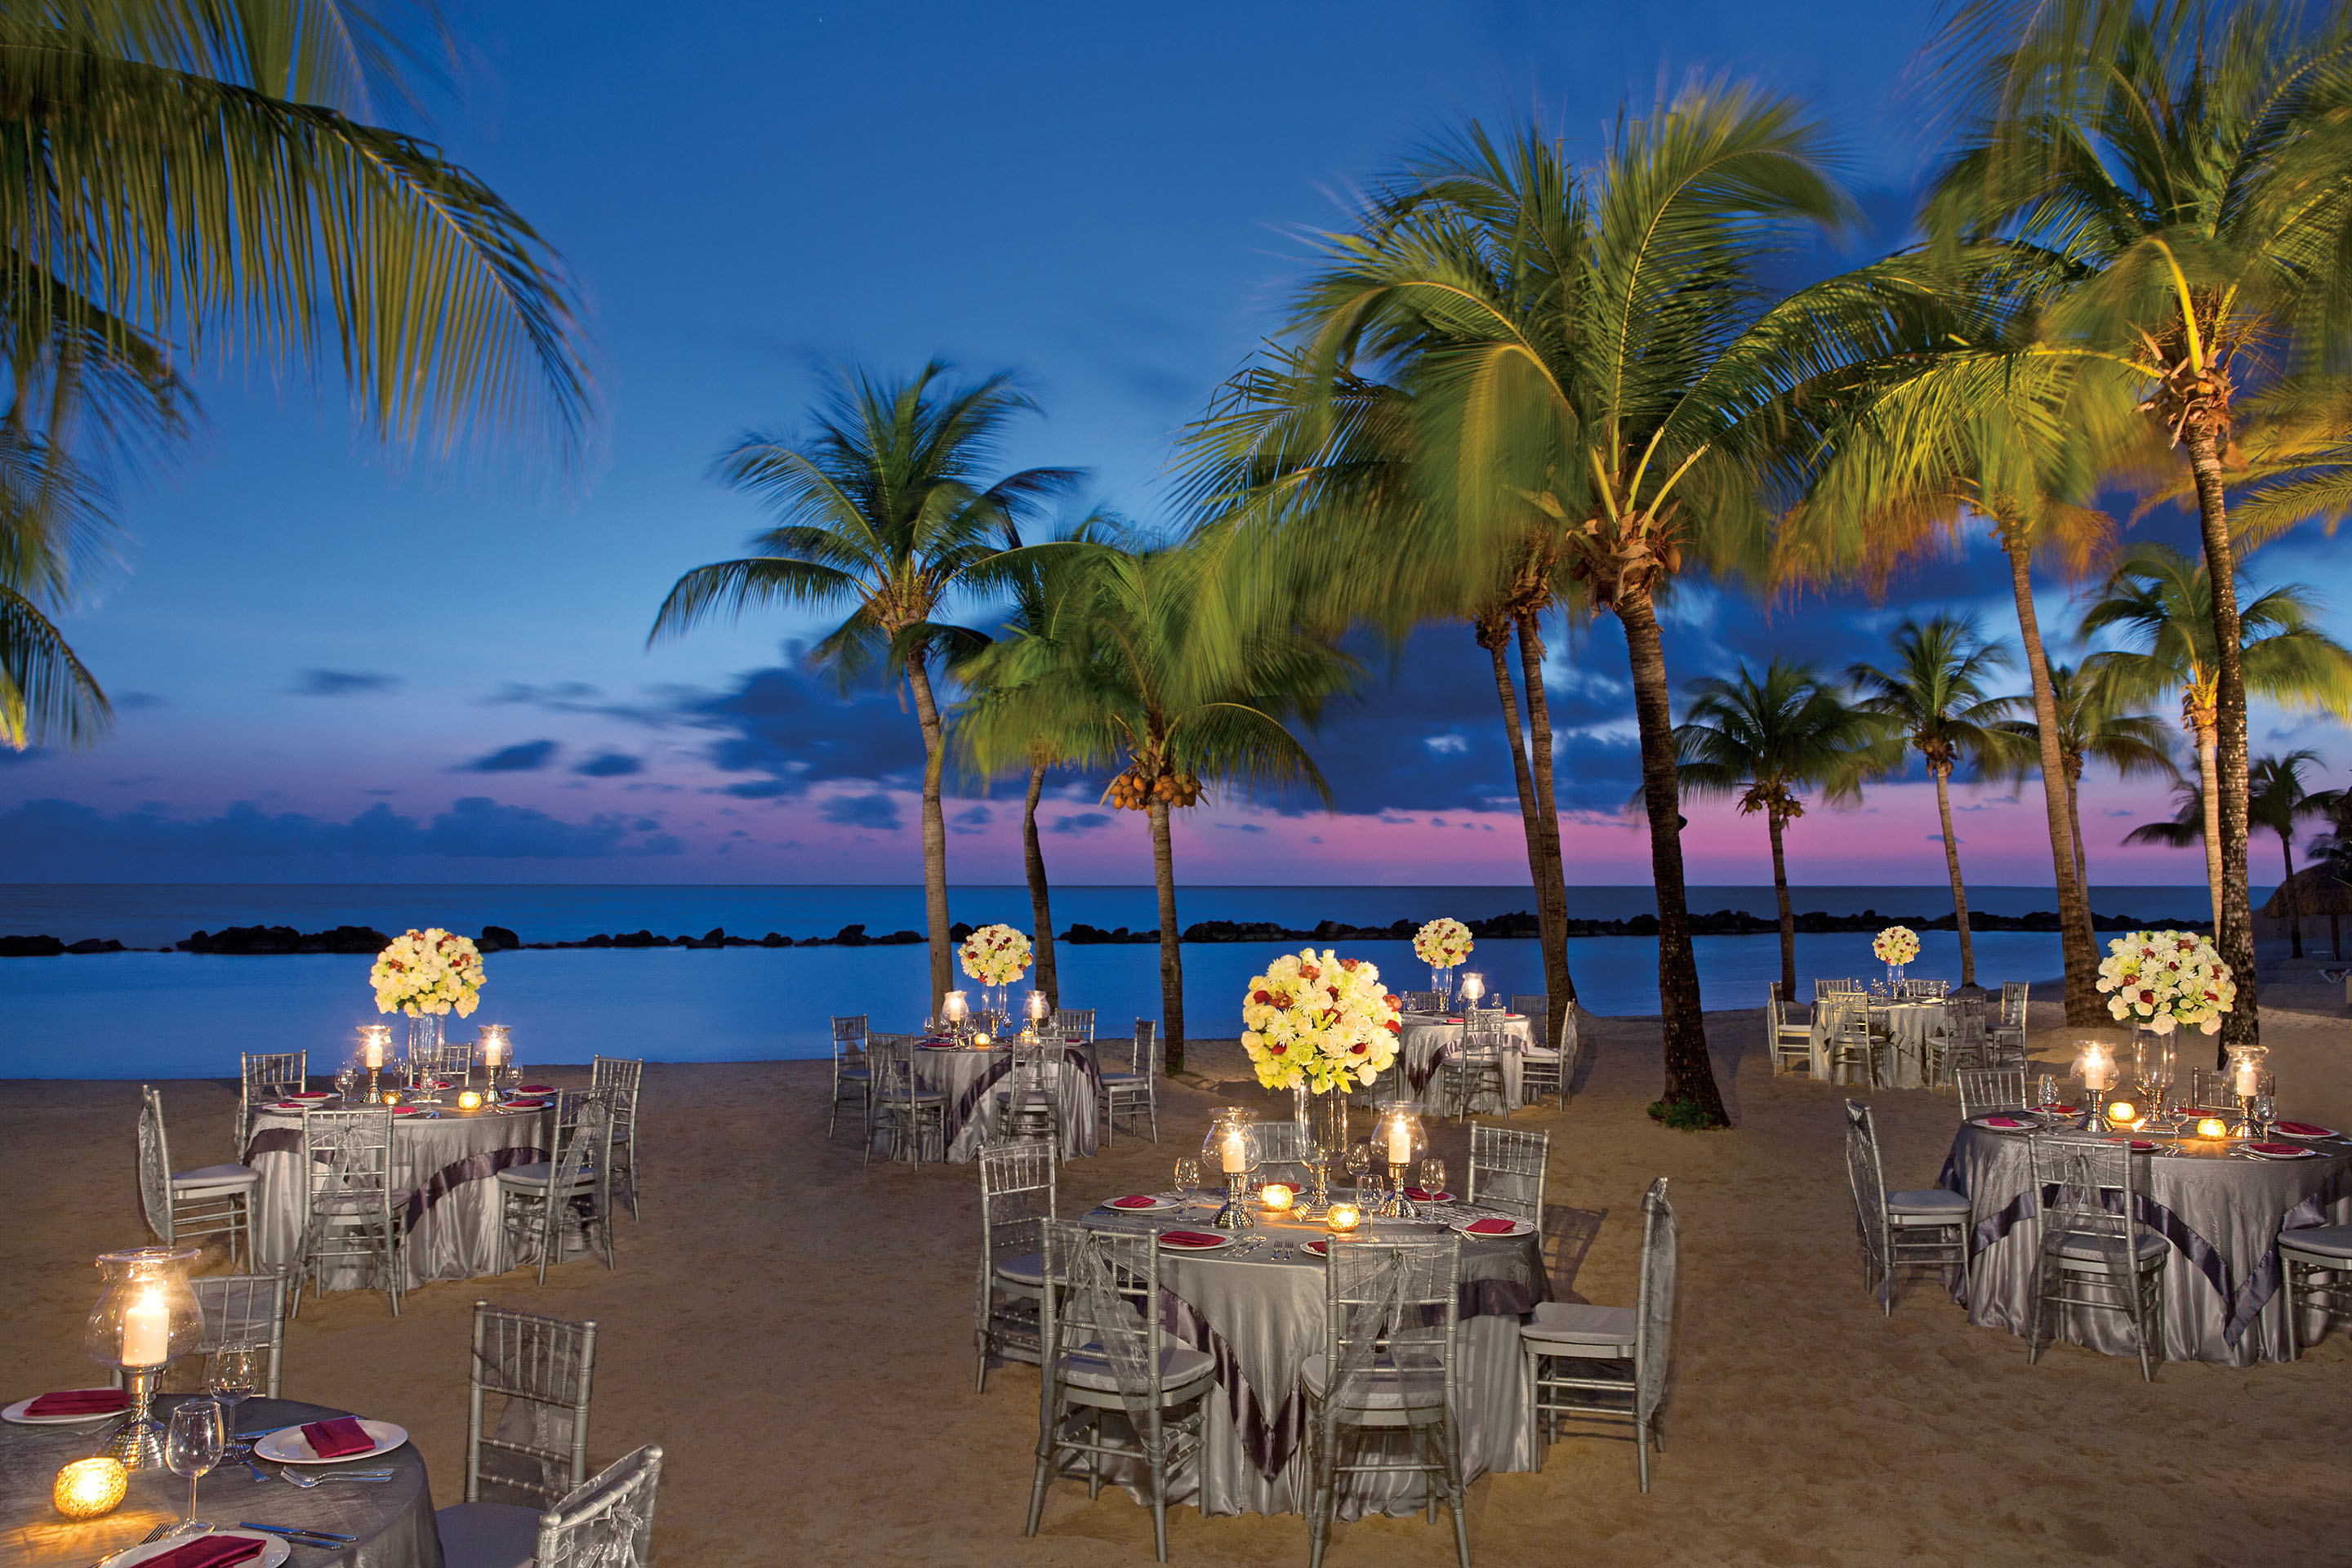 Caribbean beach set with elegant sit-down tables surround by palm trees in early evening